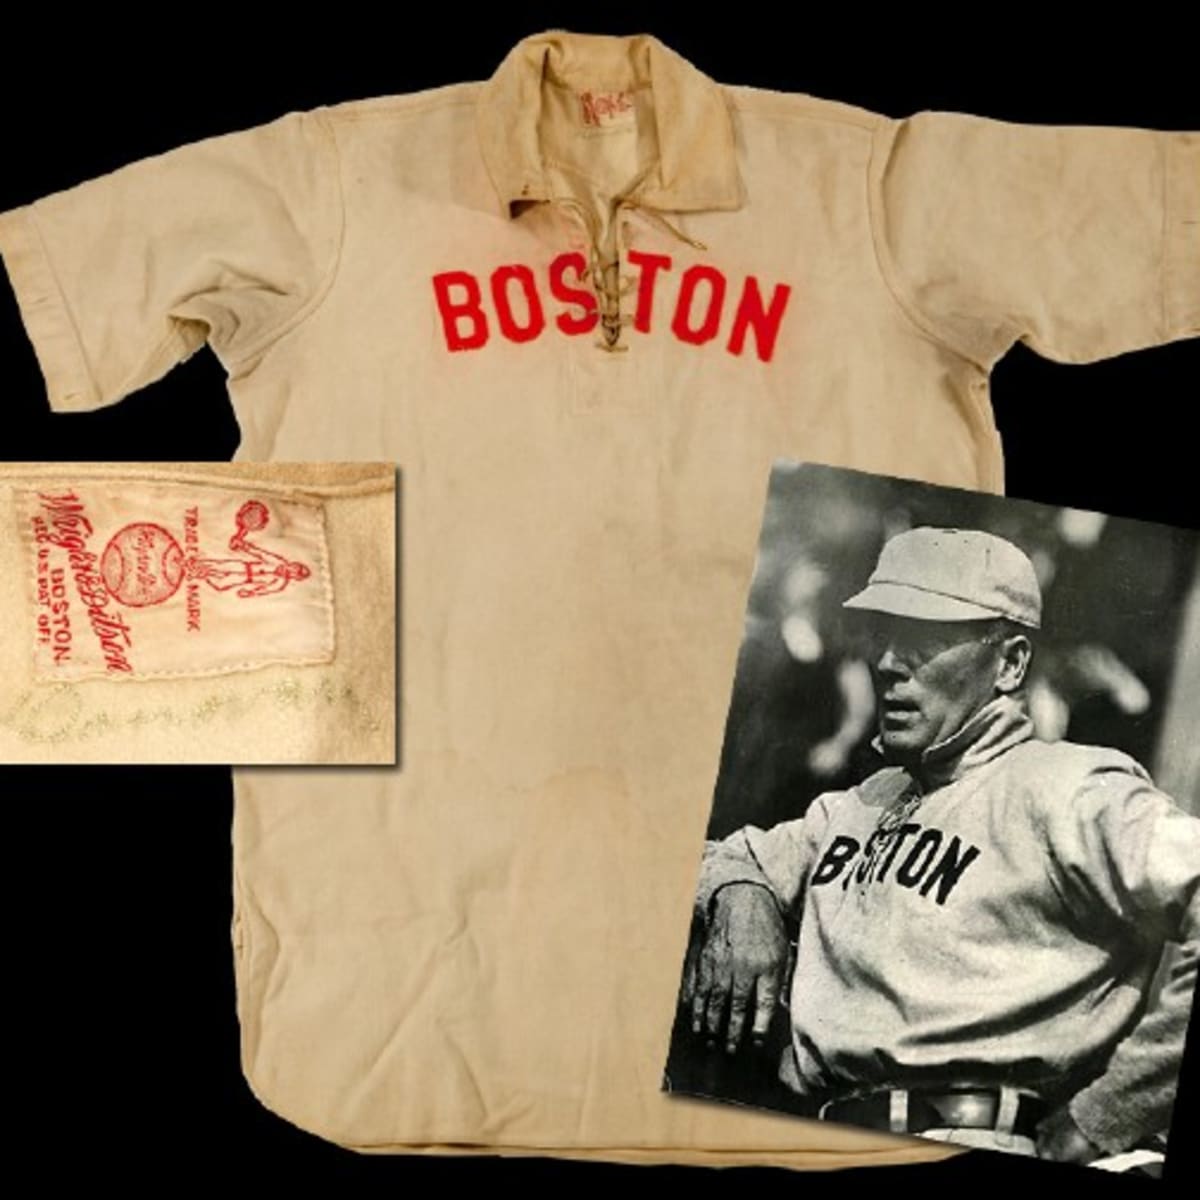 Buried Red Sox jersey to be auctioned